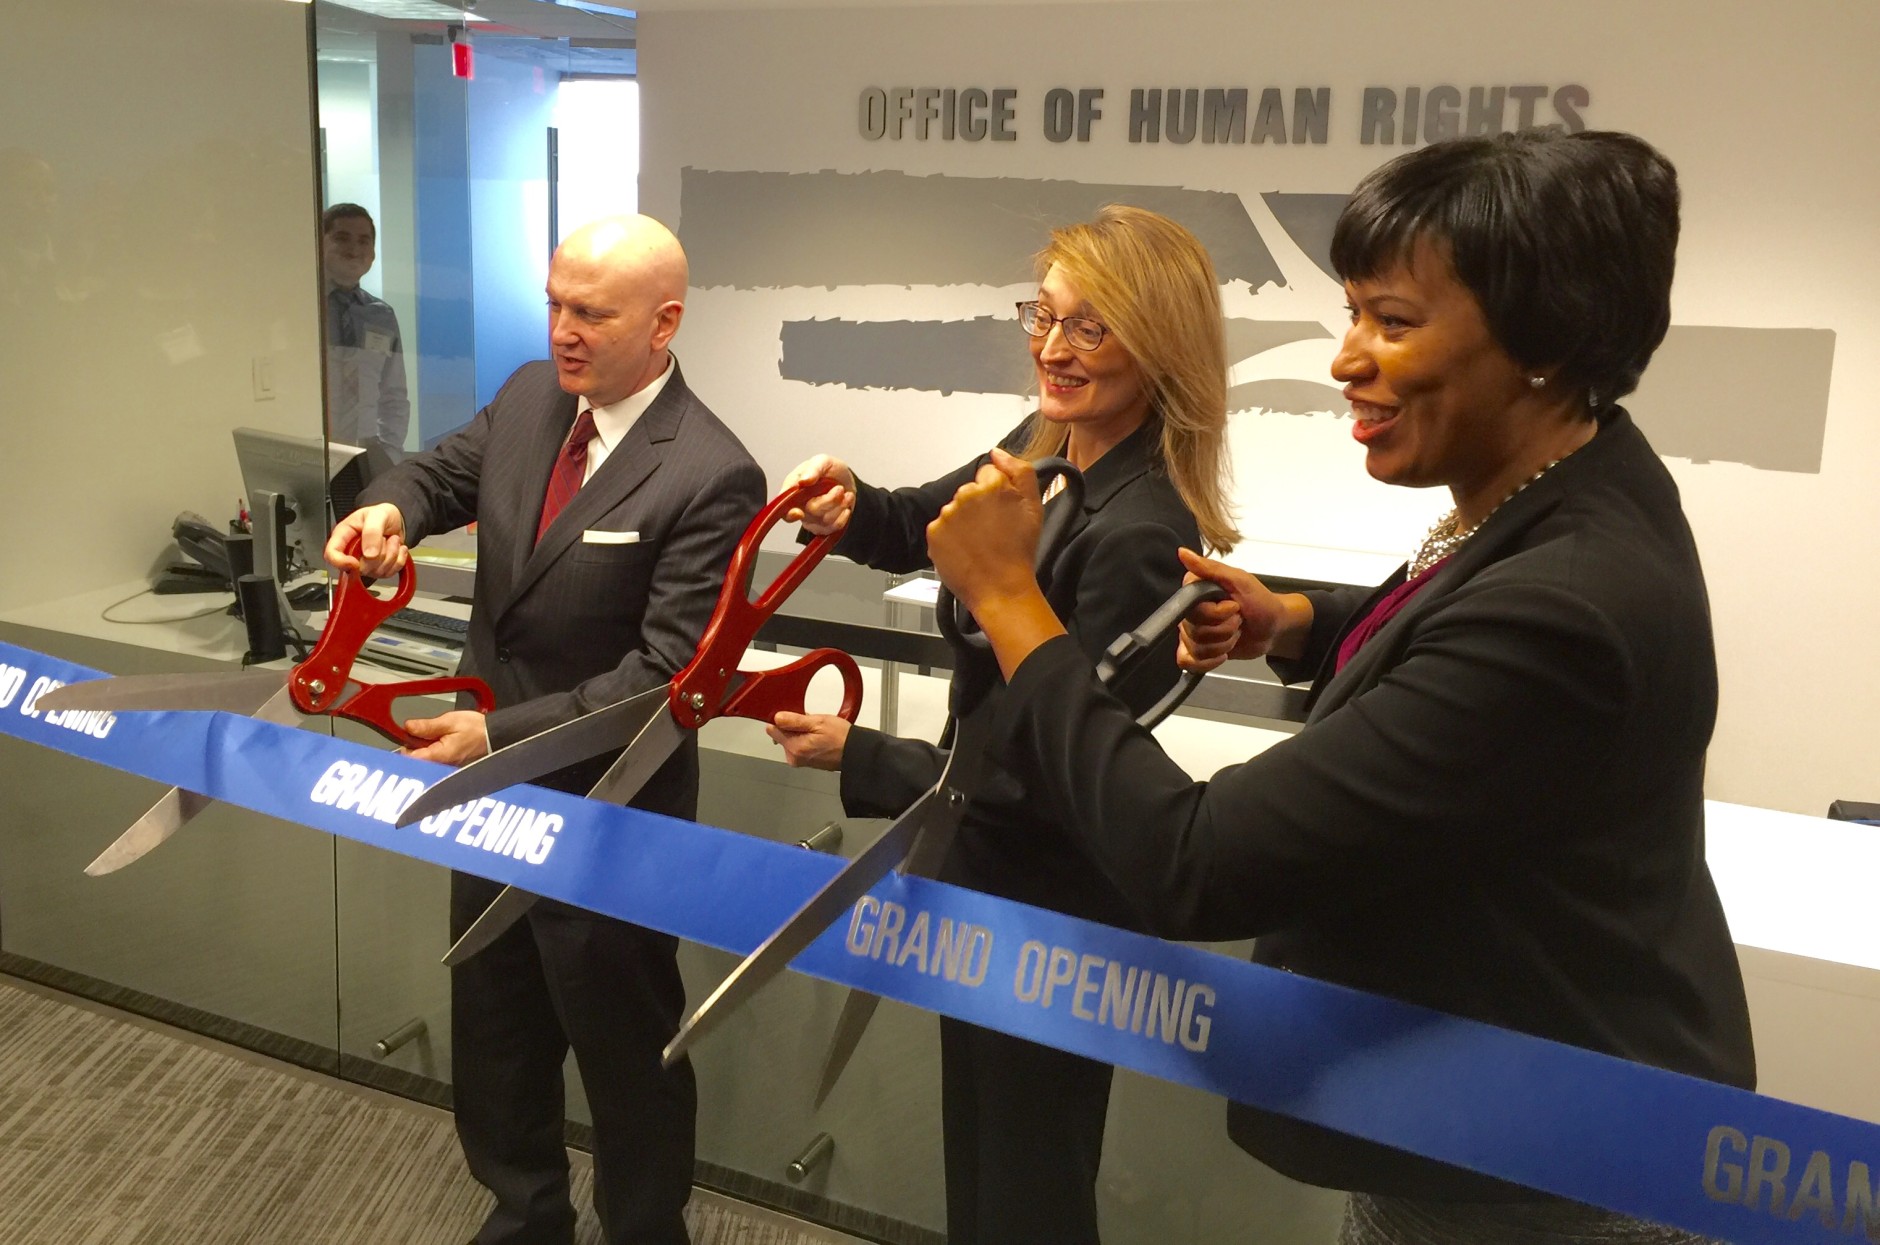 The D.C. Federal partnership in the Blue Campaign was announced at new offices for the city's Office of Human Rights.  XXXX and D.C. Office of Human Rights Director Monica Palacio join D.C. Mayor Muriel Bowers at the ribbon cutting.